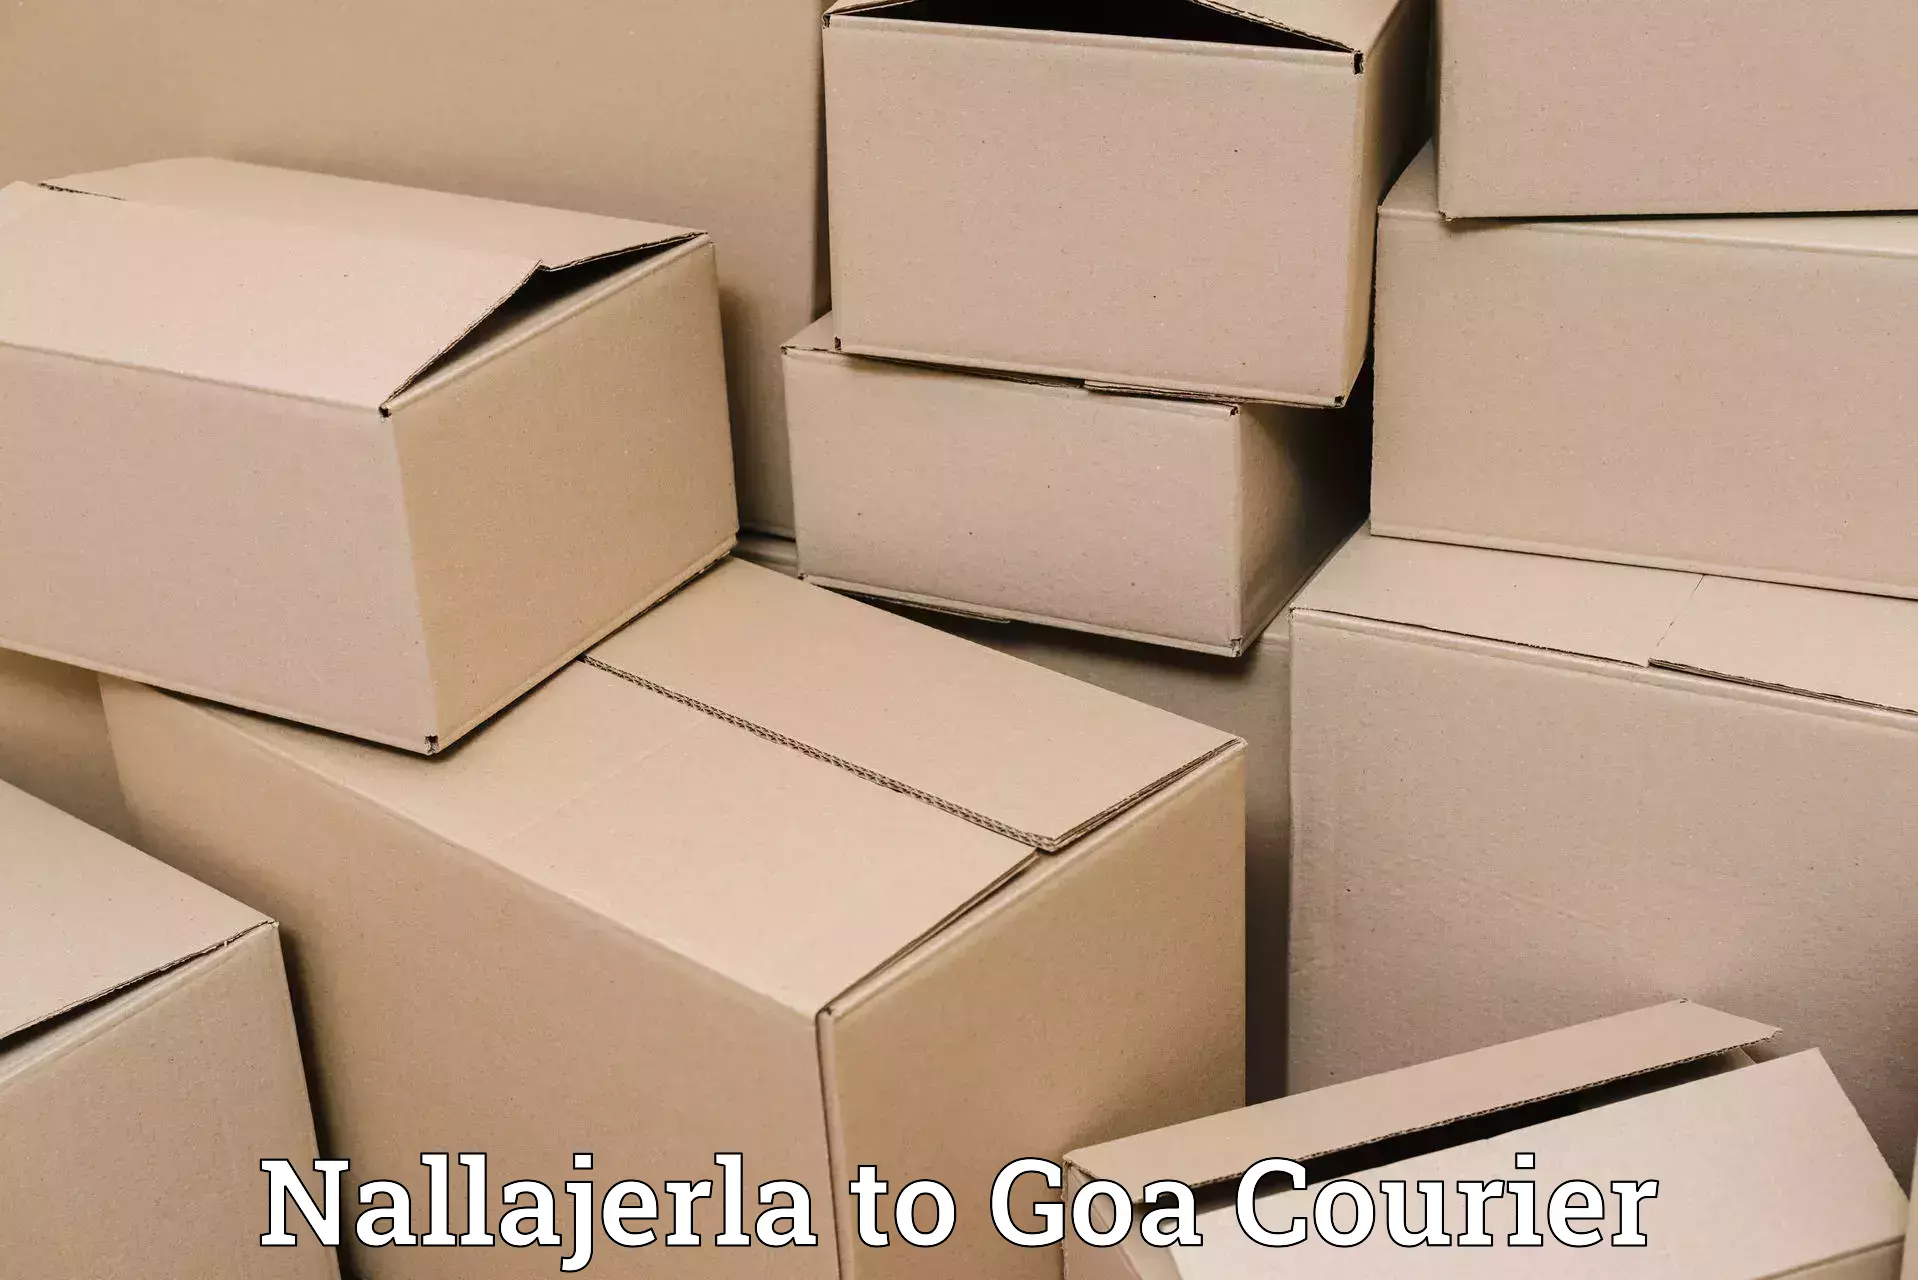 Nationwide shipping coverage in Nallajerla to Margao